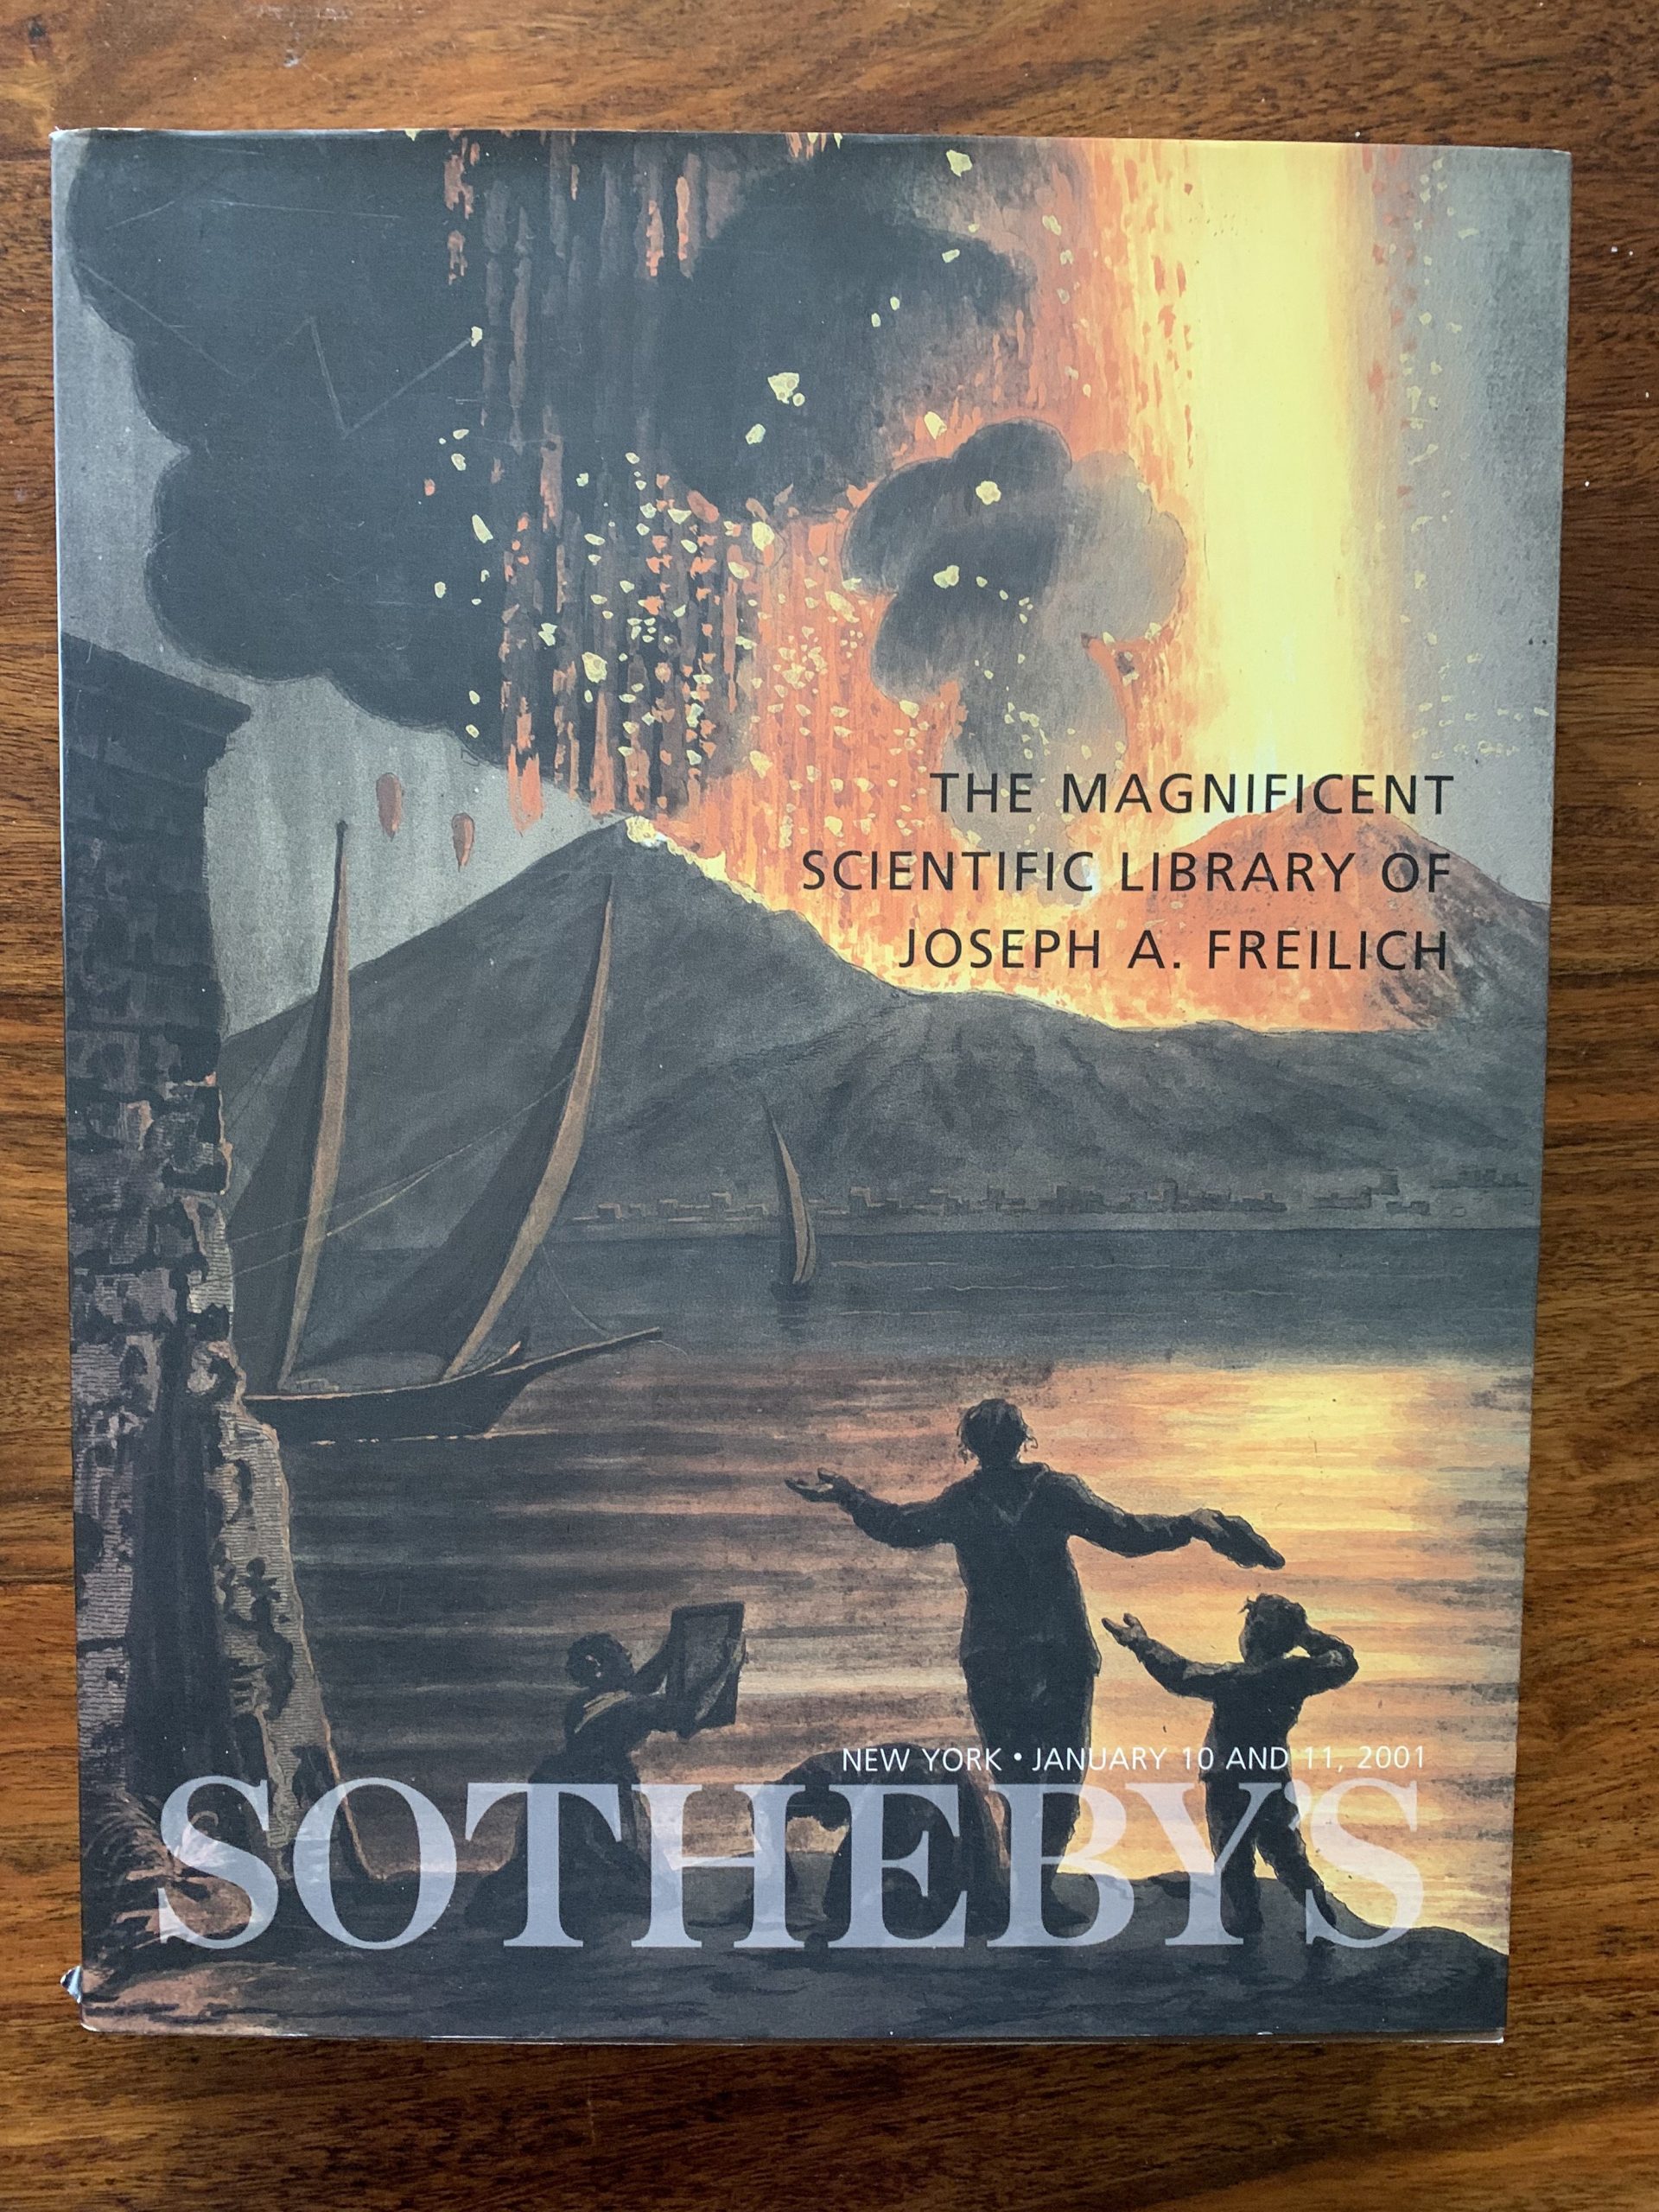 Sotheby’s. The Magnificent Scientific Library of Joseph A. Freilich